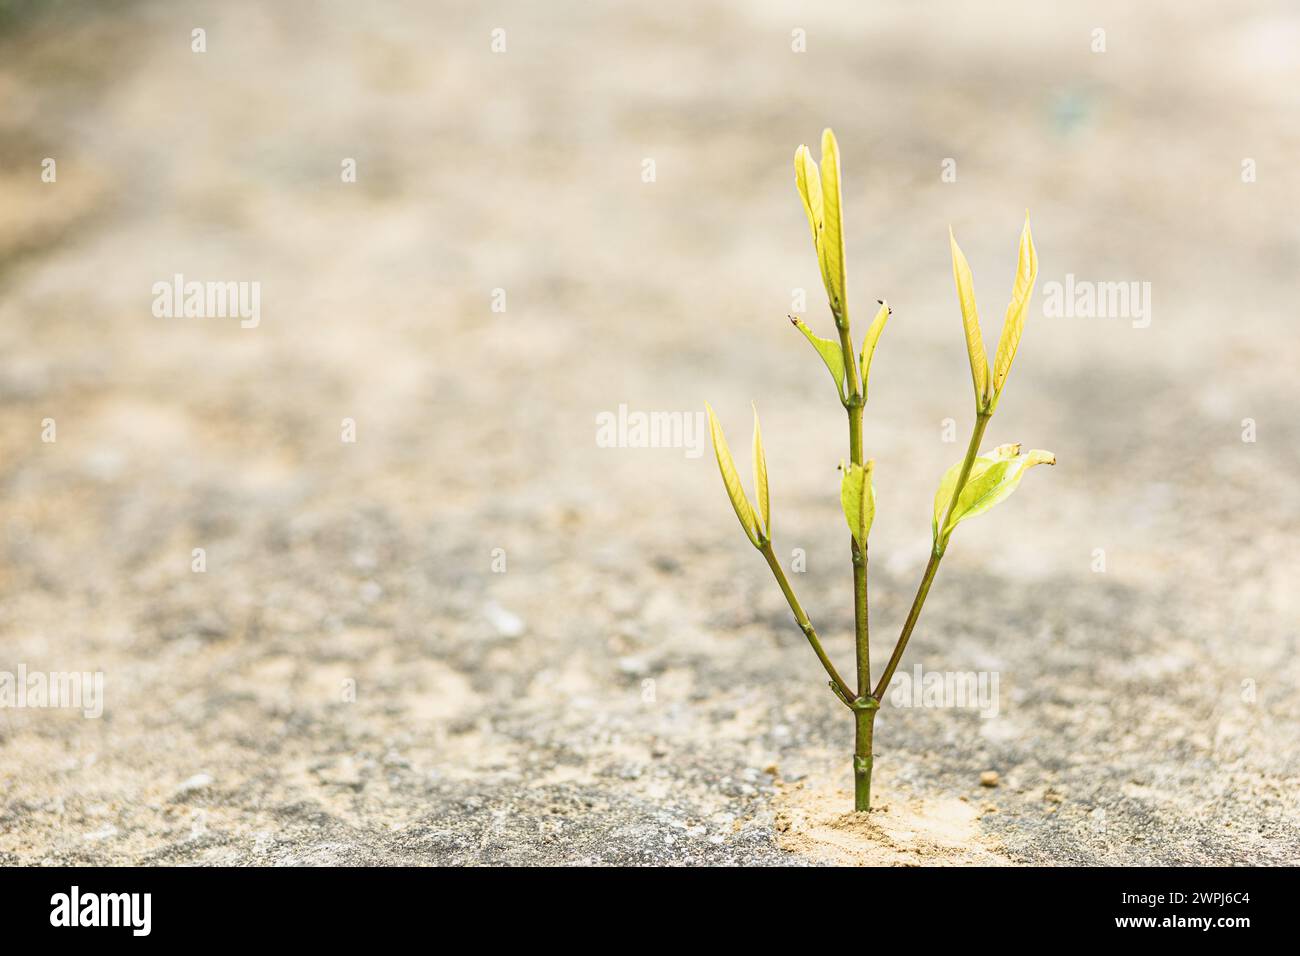 Earth Day is an important day. It refers to human existence on earth. Stock Photo